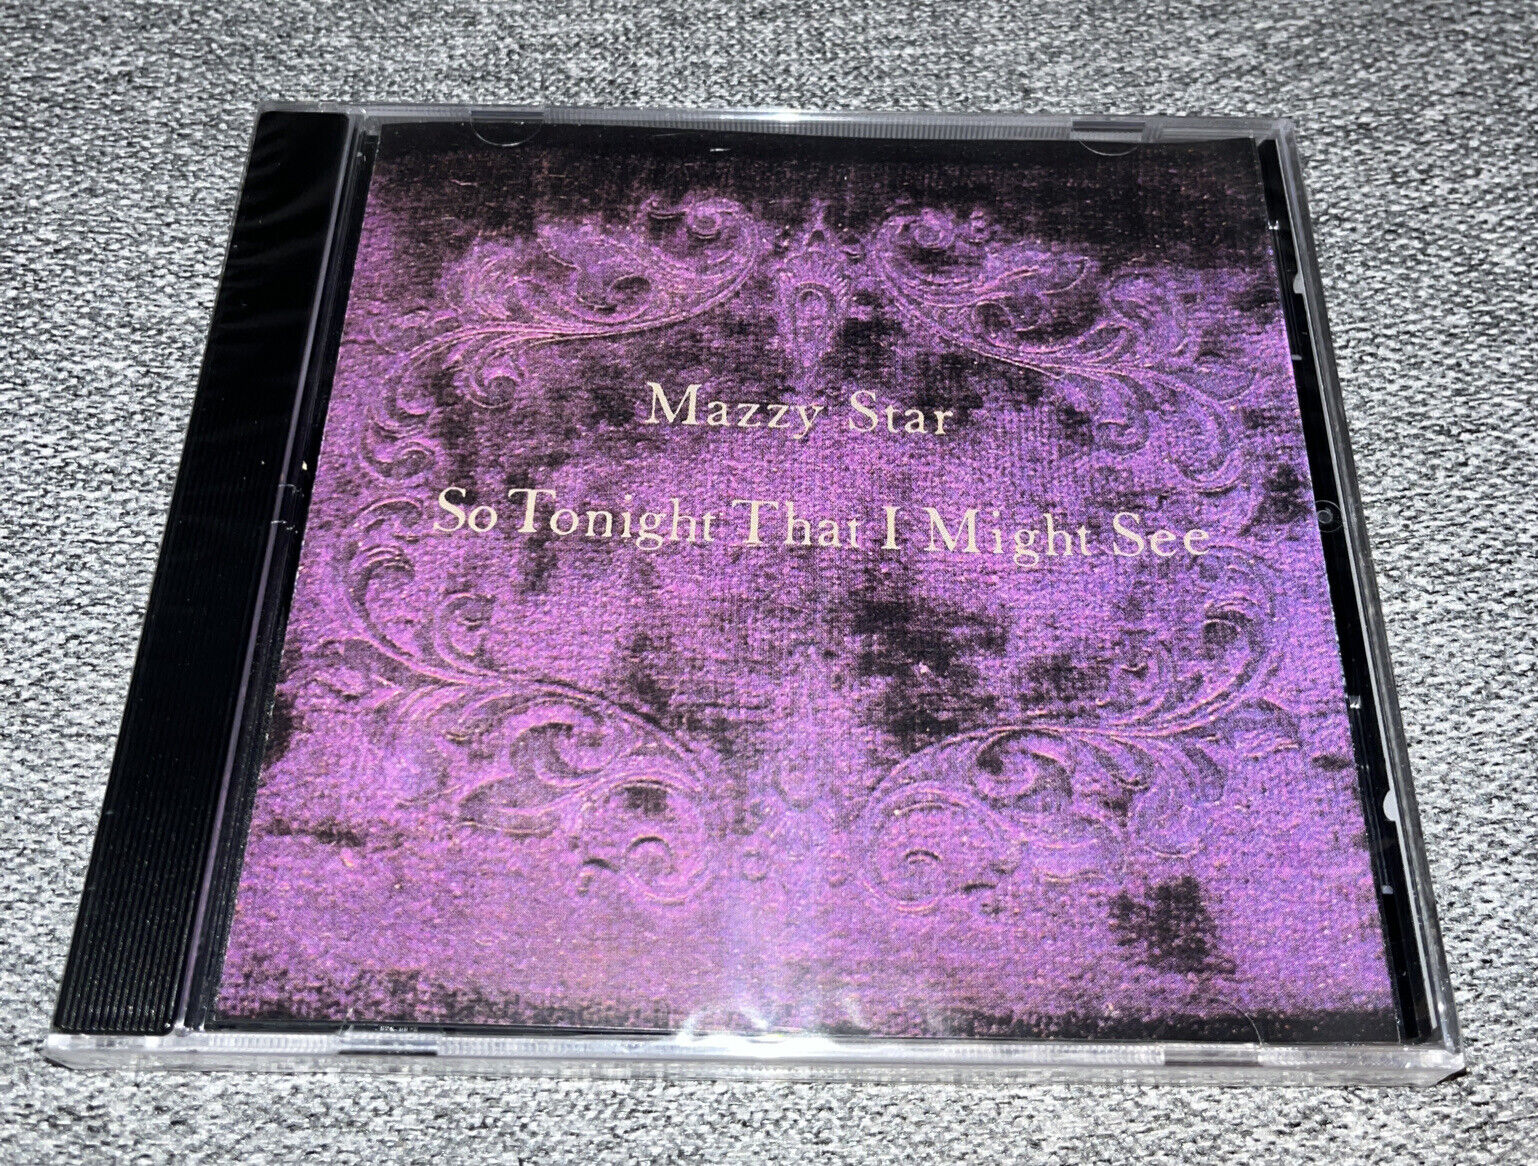 So Tonight That I Might See by Mazzy Star (CD, 1993)